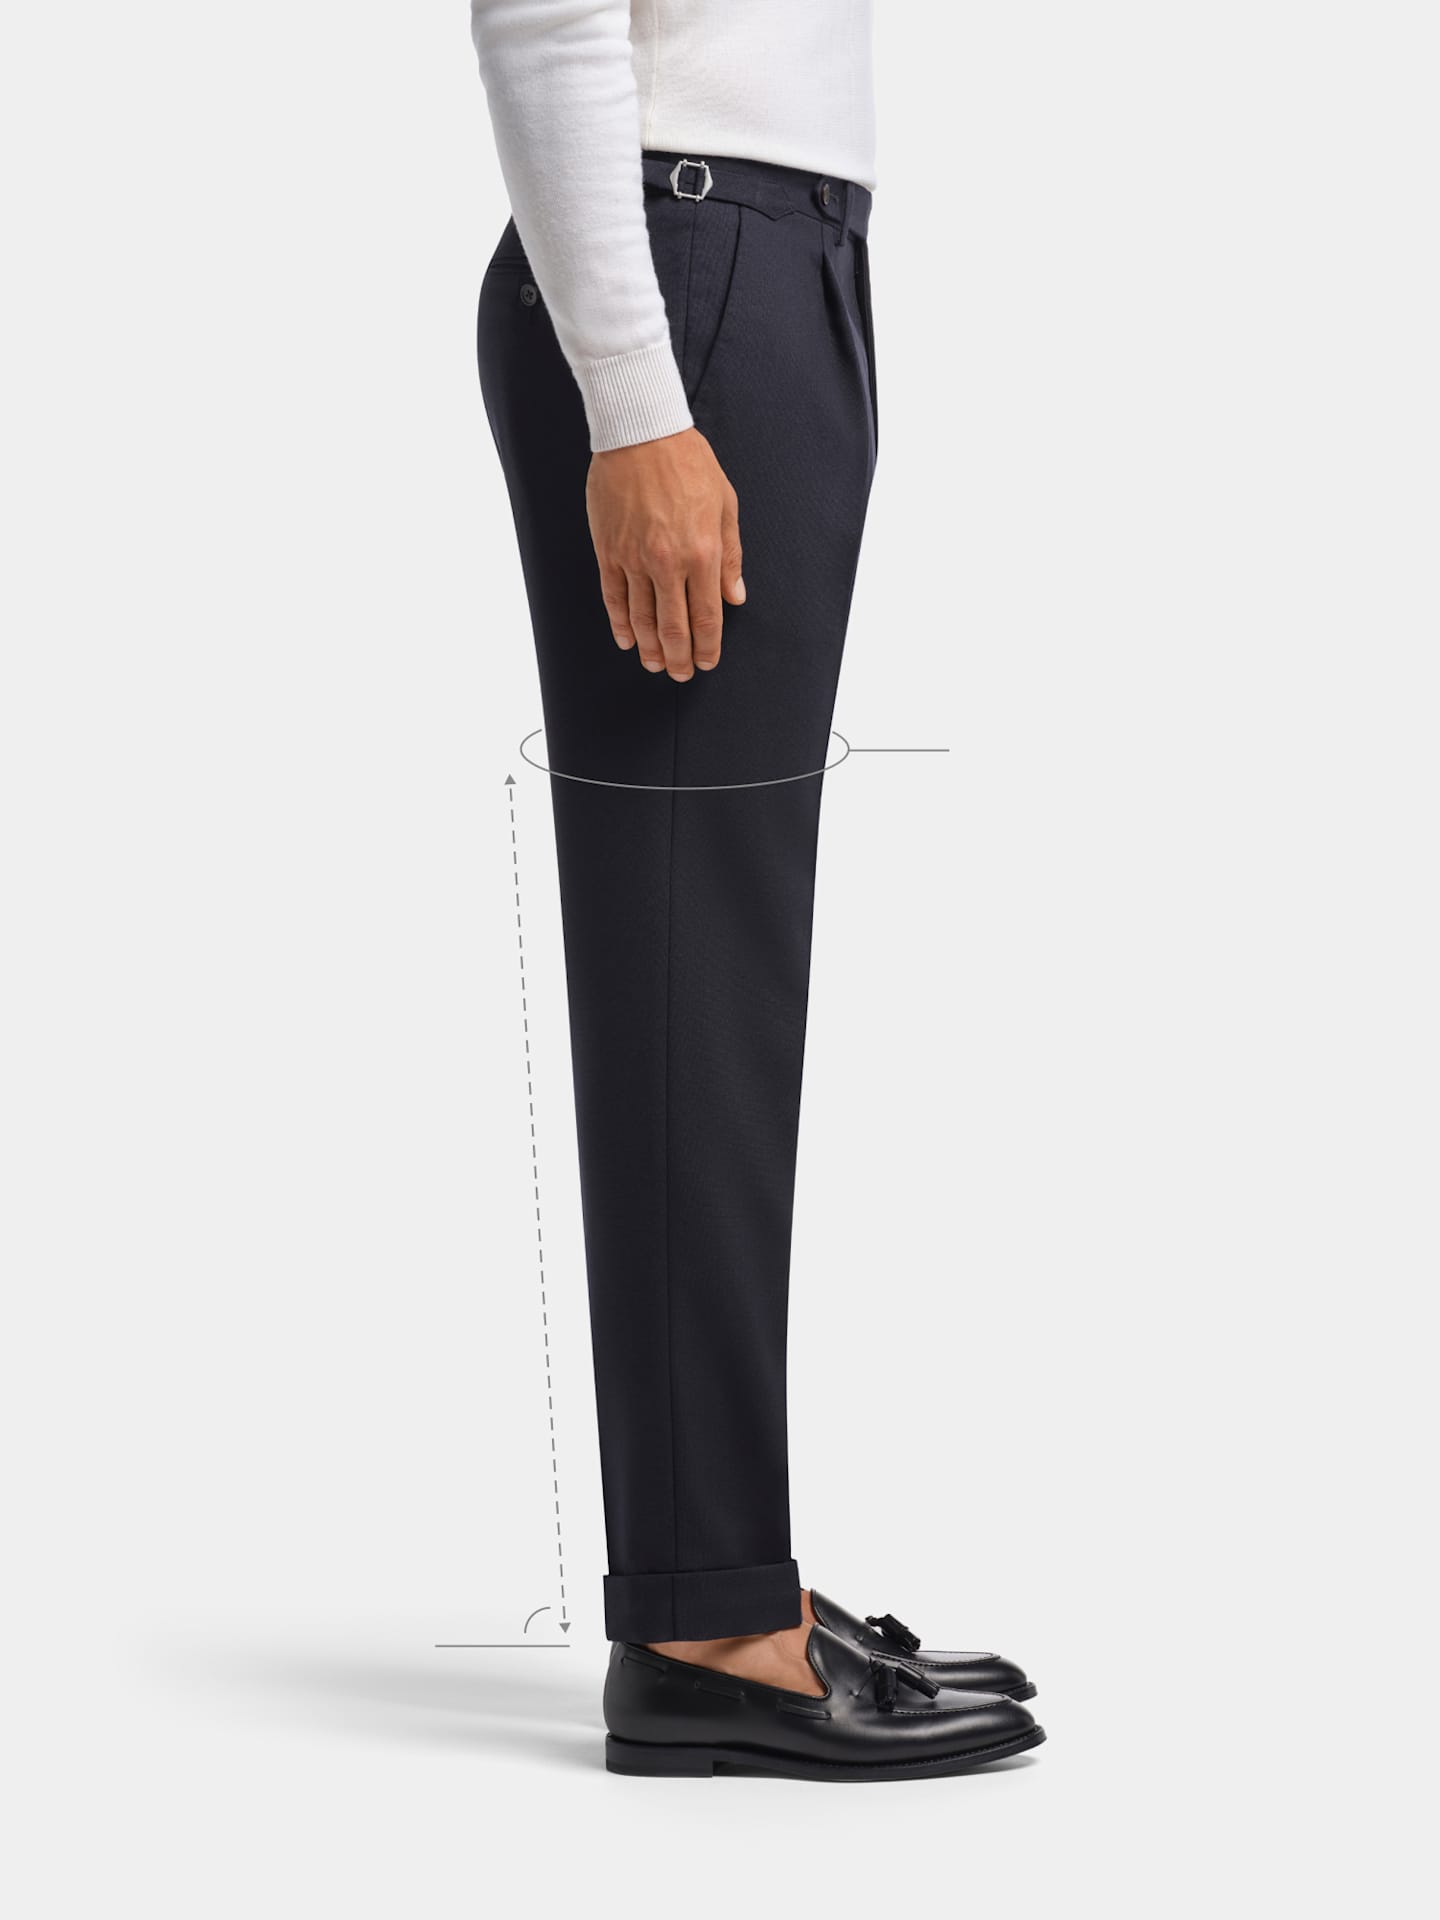 Profile view illustrating a slim, tapered leg fit.